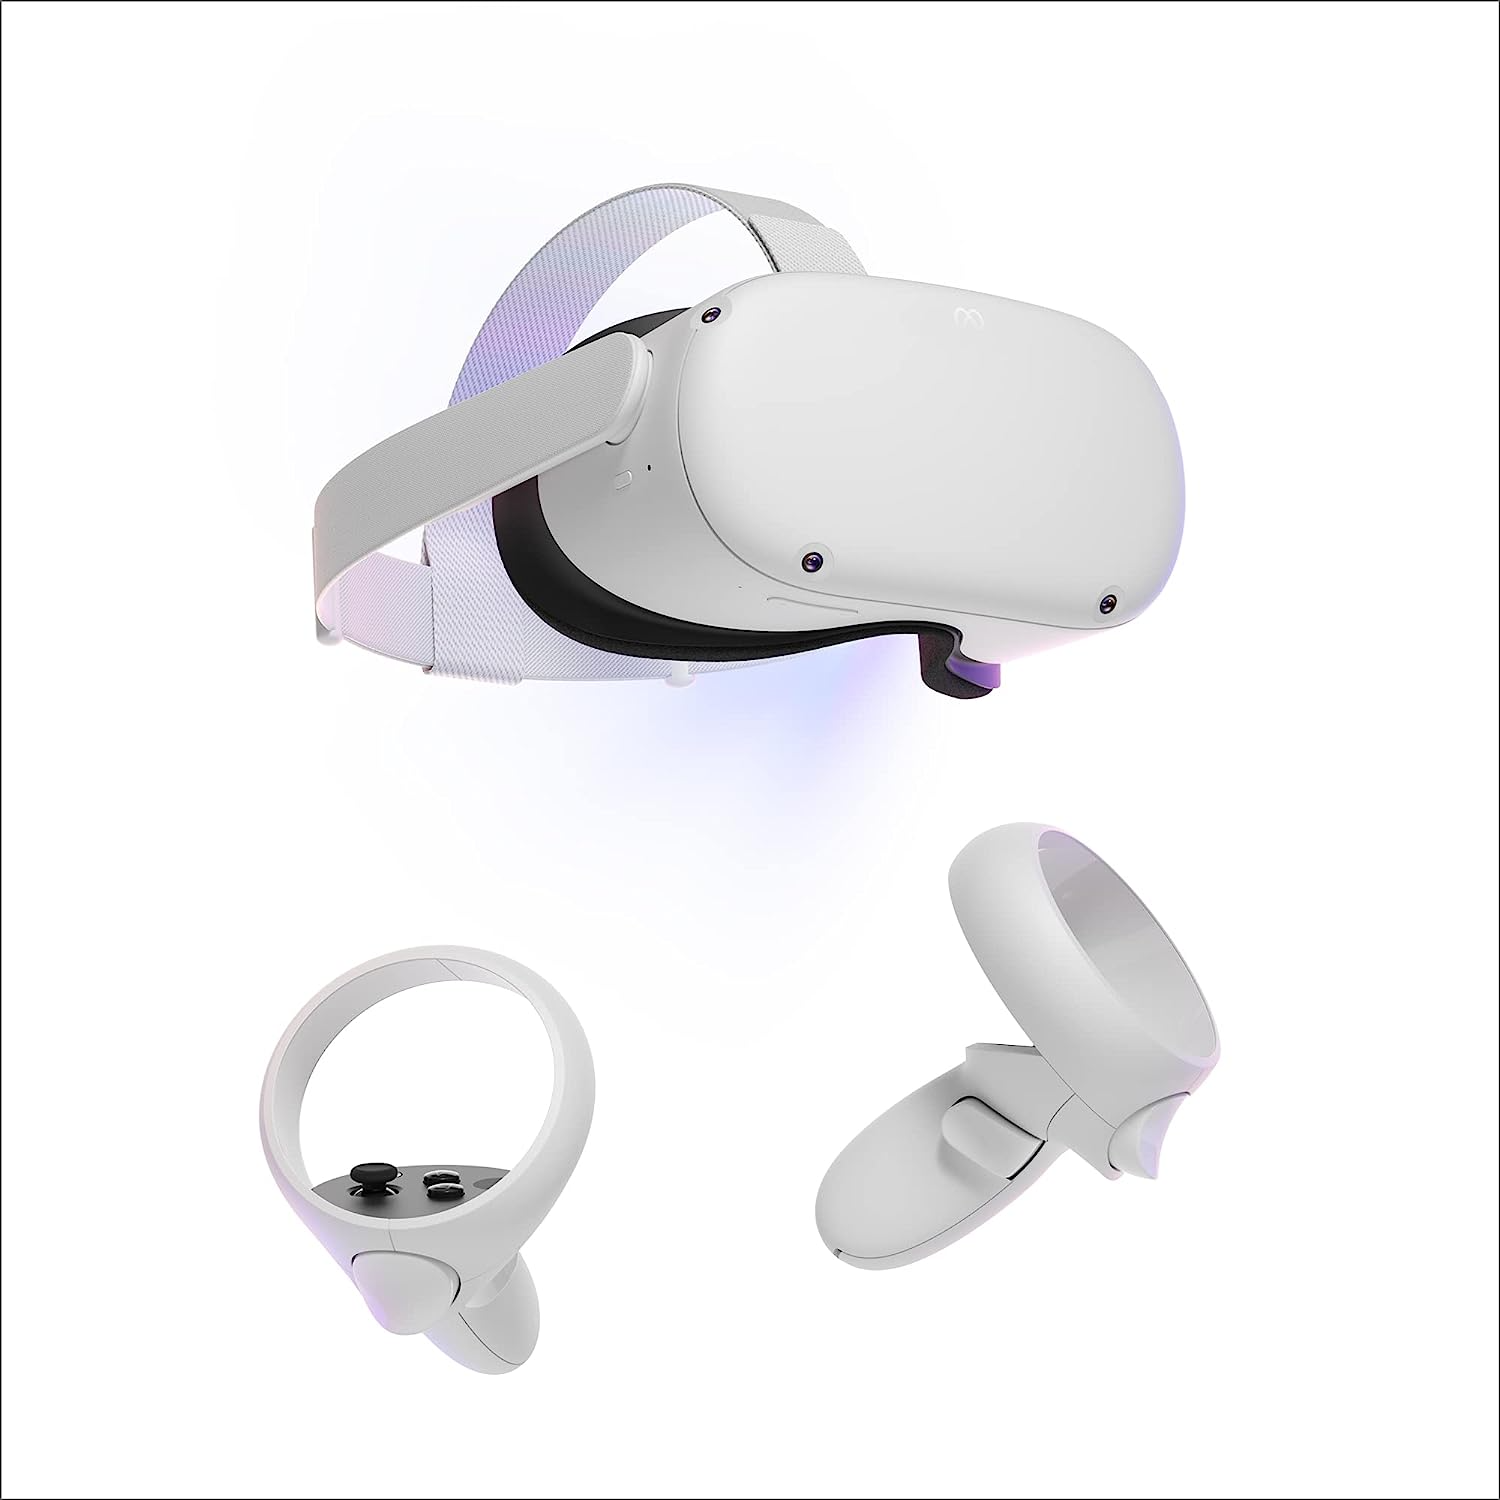 META QUEST 2 -Advanced All-In-One Virtual Reality Headset-256GB